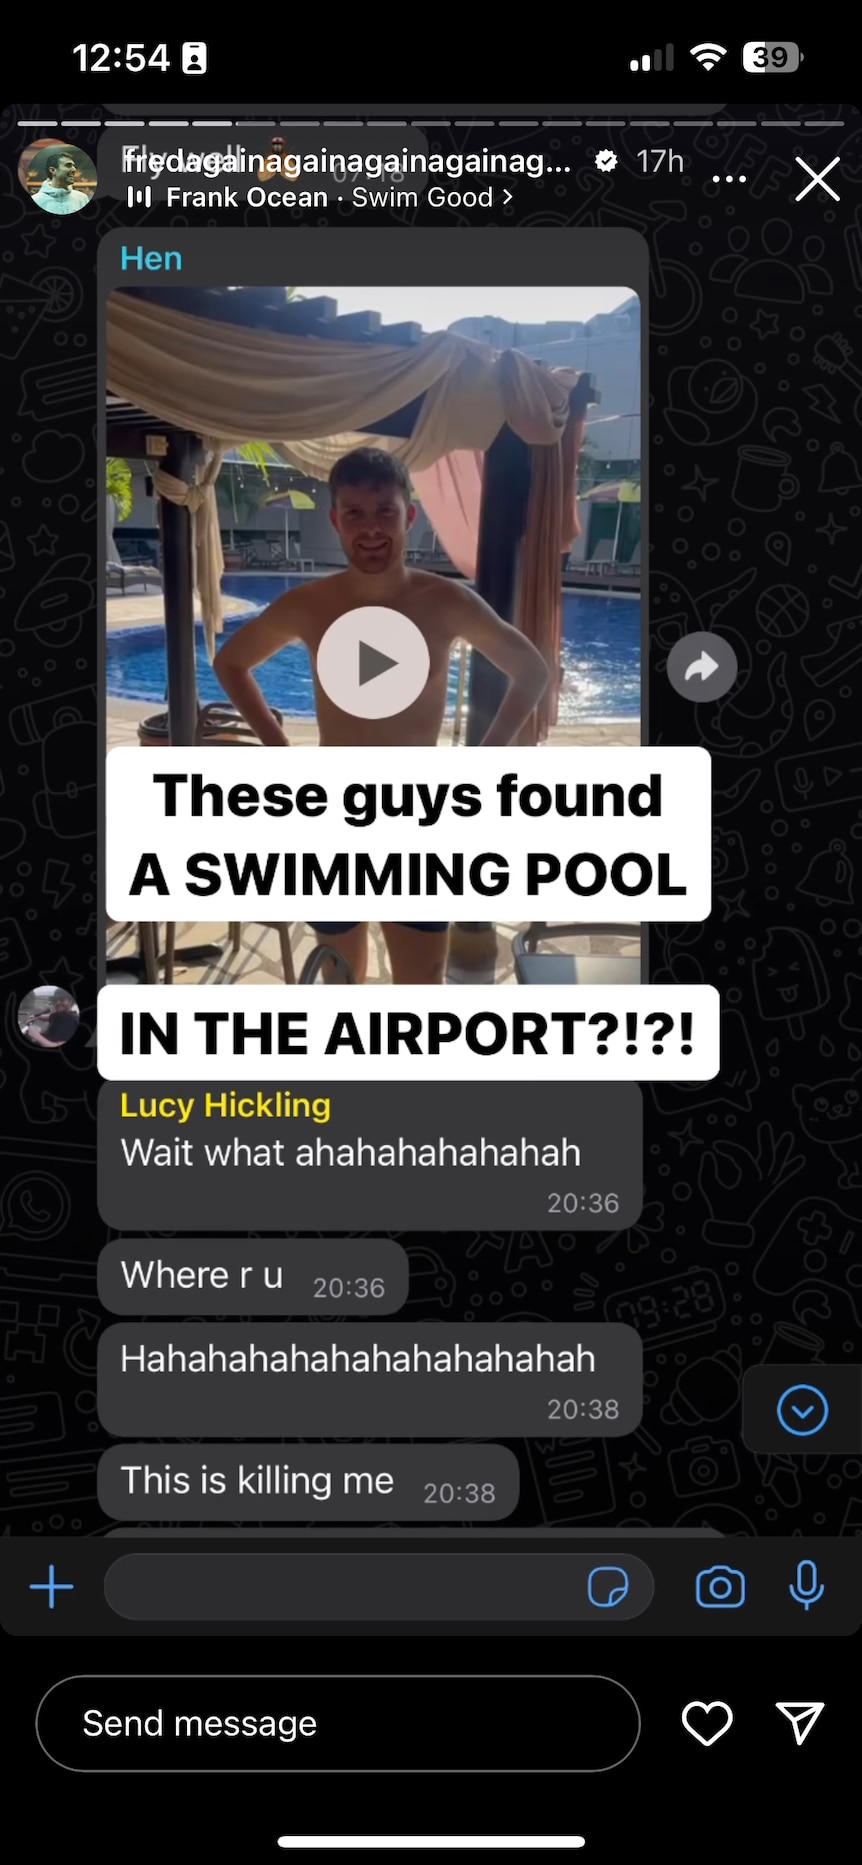 Screengrab of an Instagram story showing a WhatsApp message with a photo of a man beside a pool